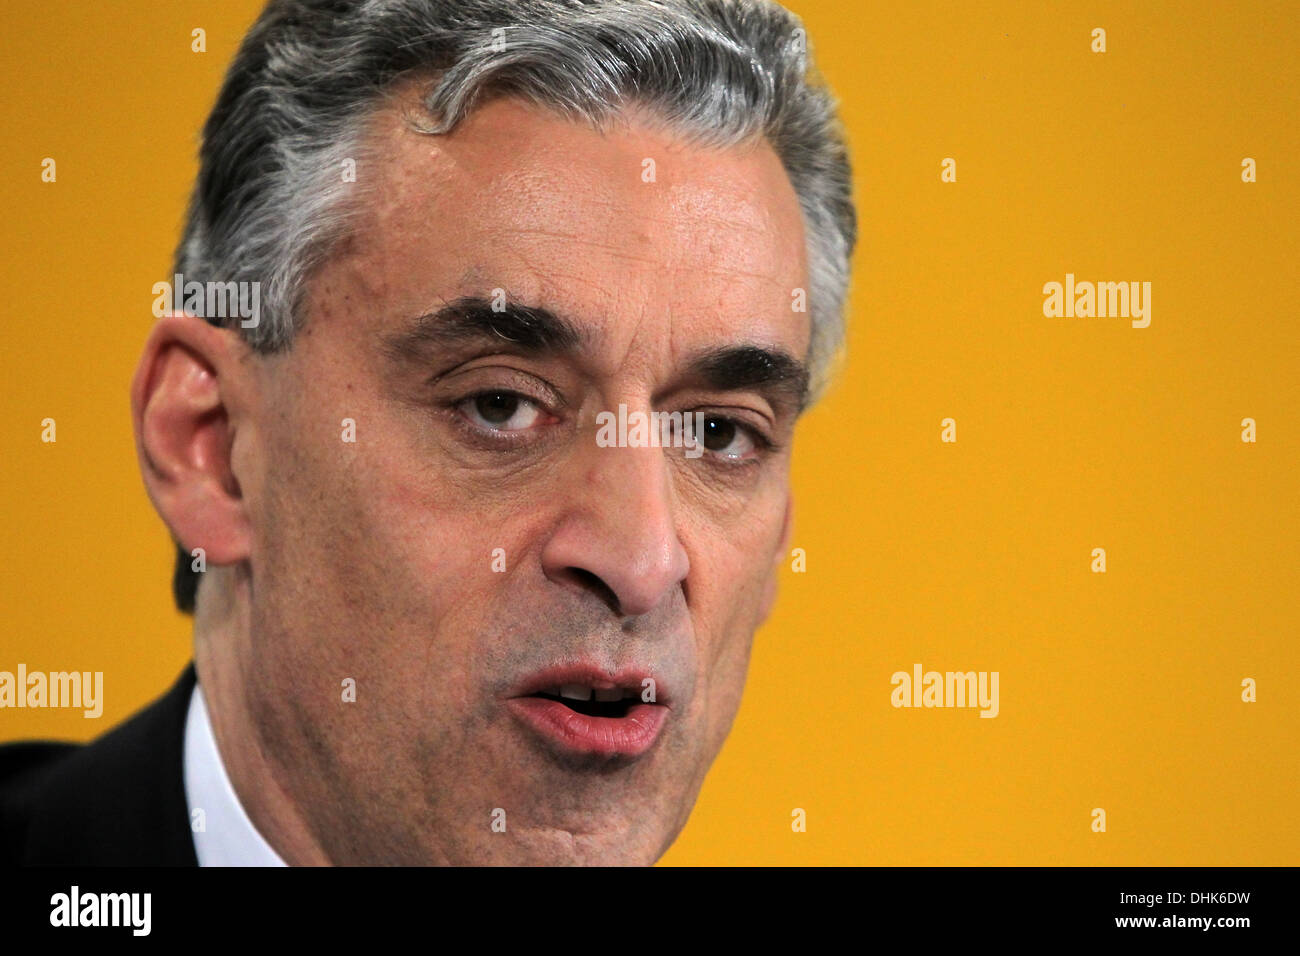 CEO of Deutsche Post AG, Frank Appel, holds a press conference at Hilten Hotel in Frankfurt Main, Germany, 12 November 2013. Appel presented the company's results for the third quarter 2013. Photo: FREDRIK VON ERICHSEN/dpa Stock Photo